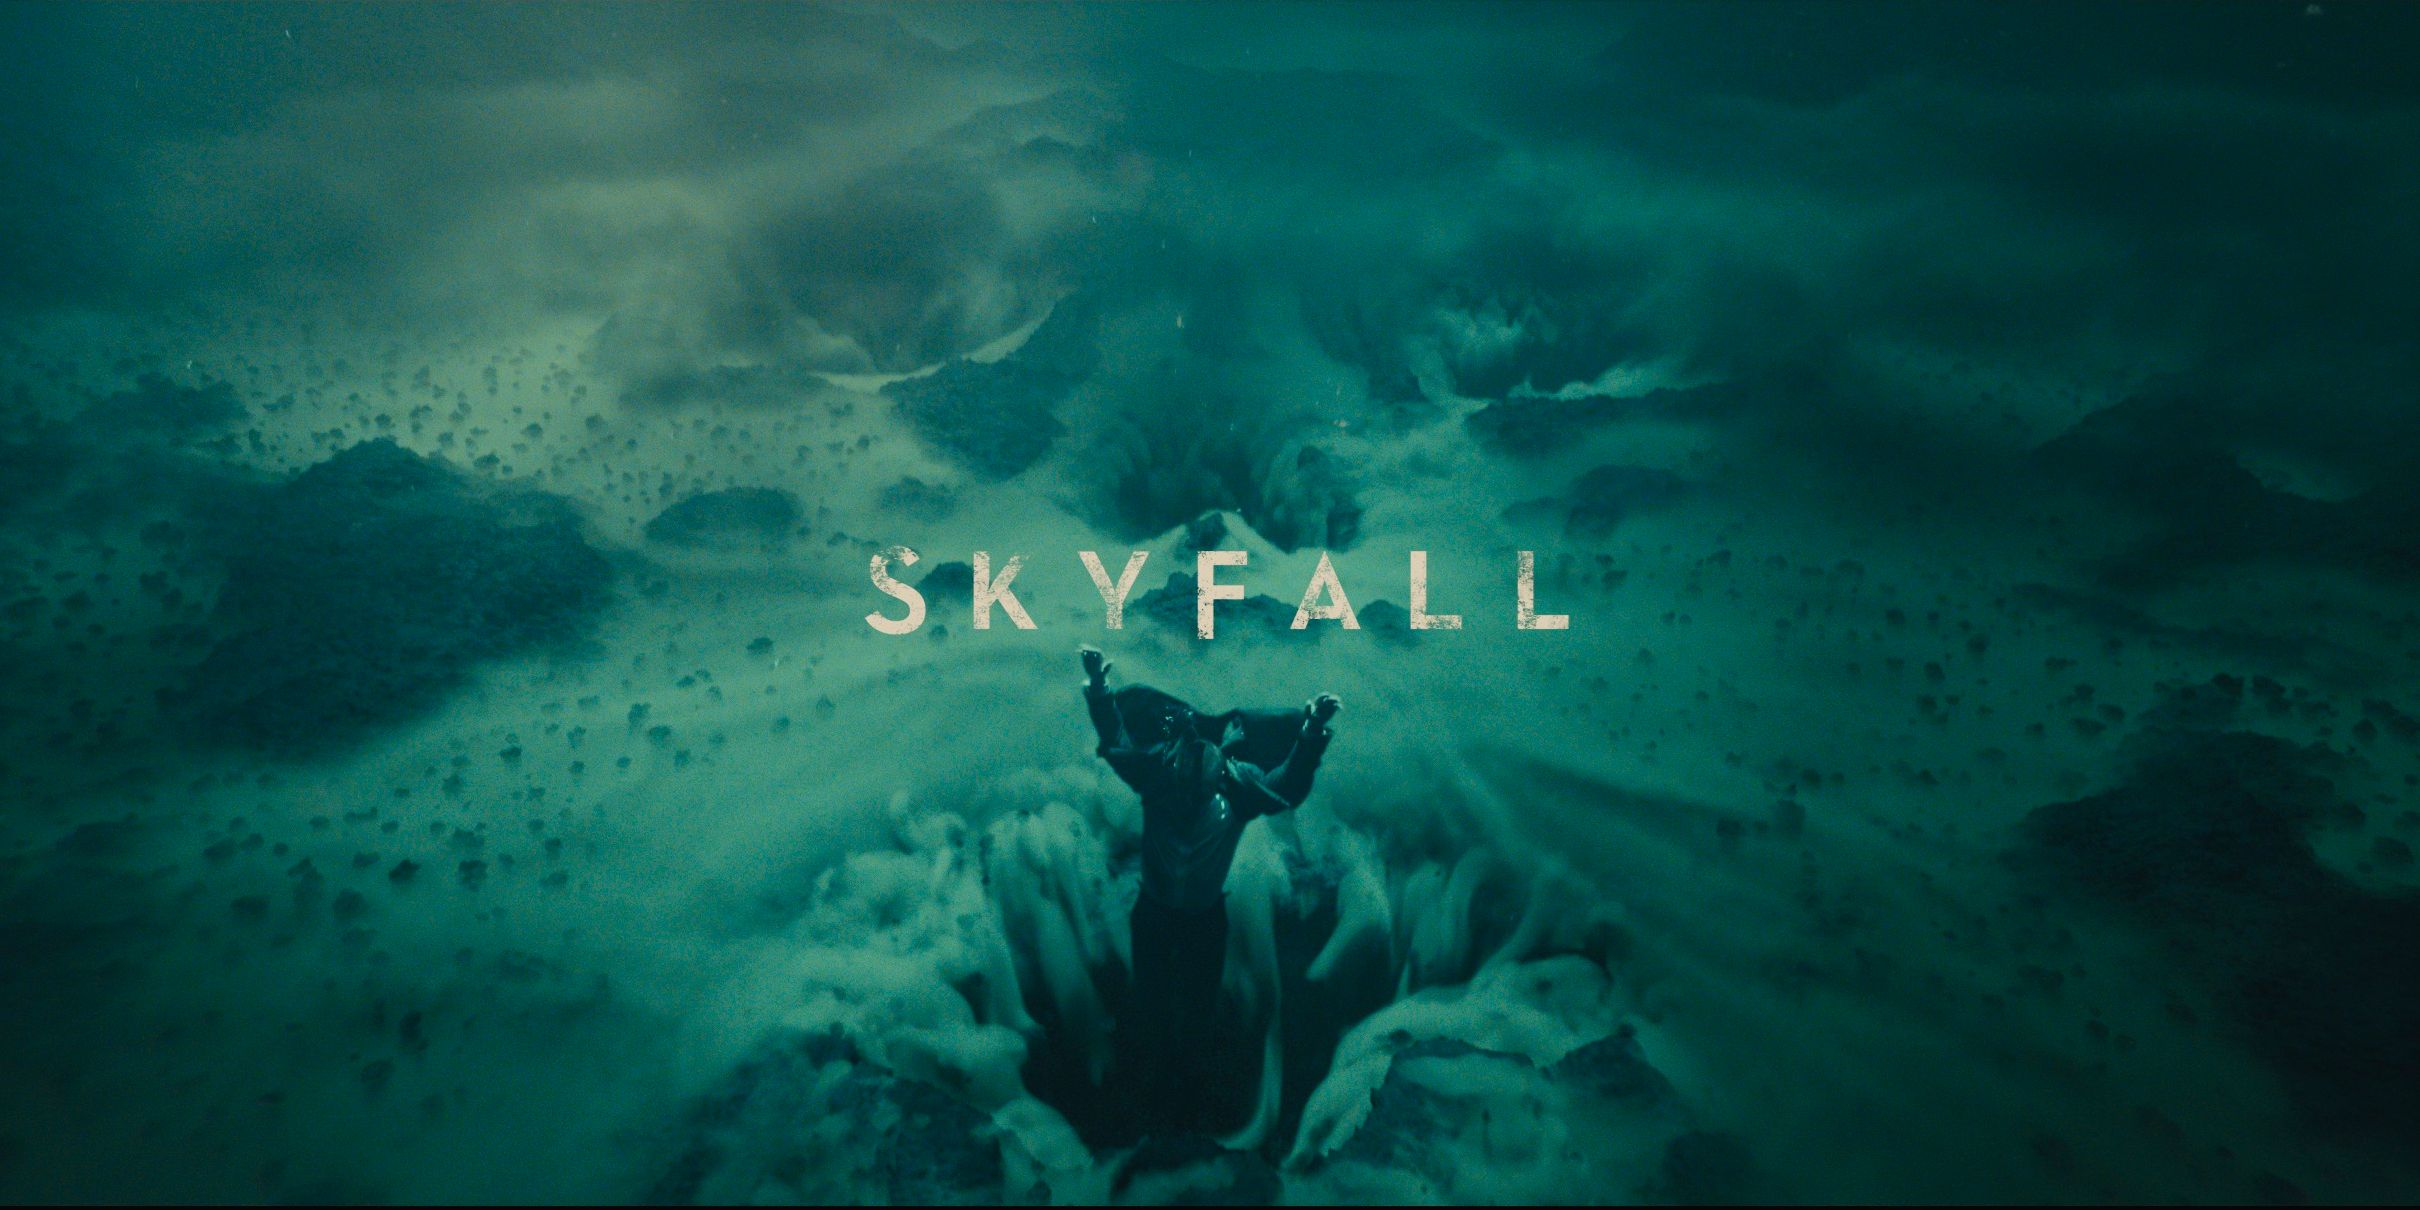 James Bond is dragged under water and into the sand in the opening credits sequence for 'Skyfall'.